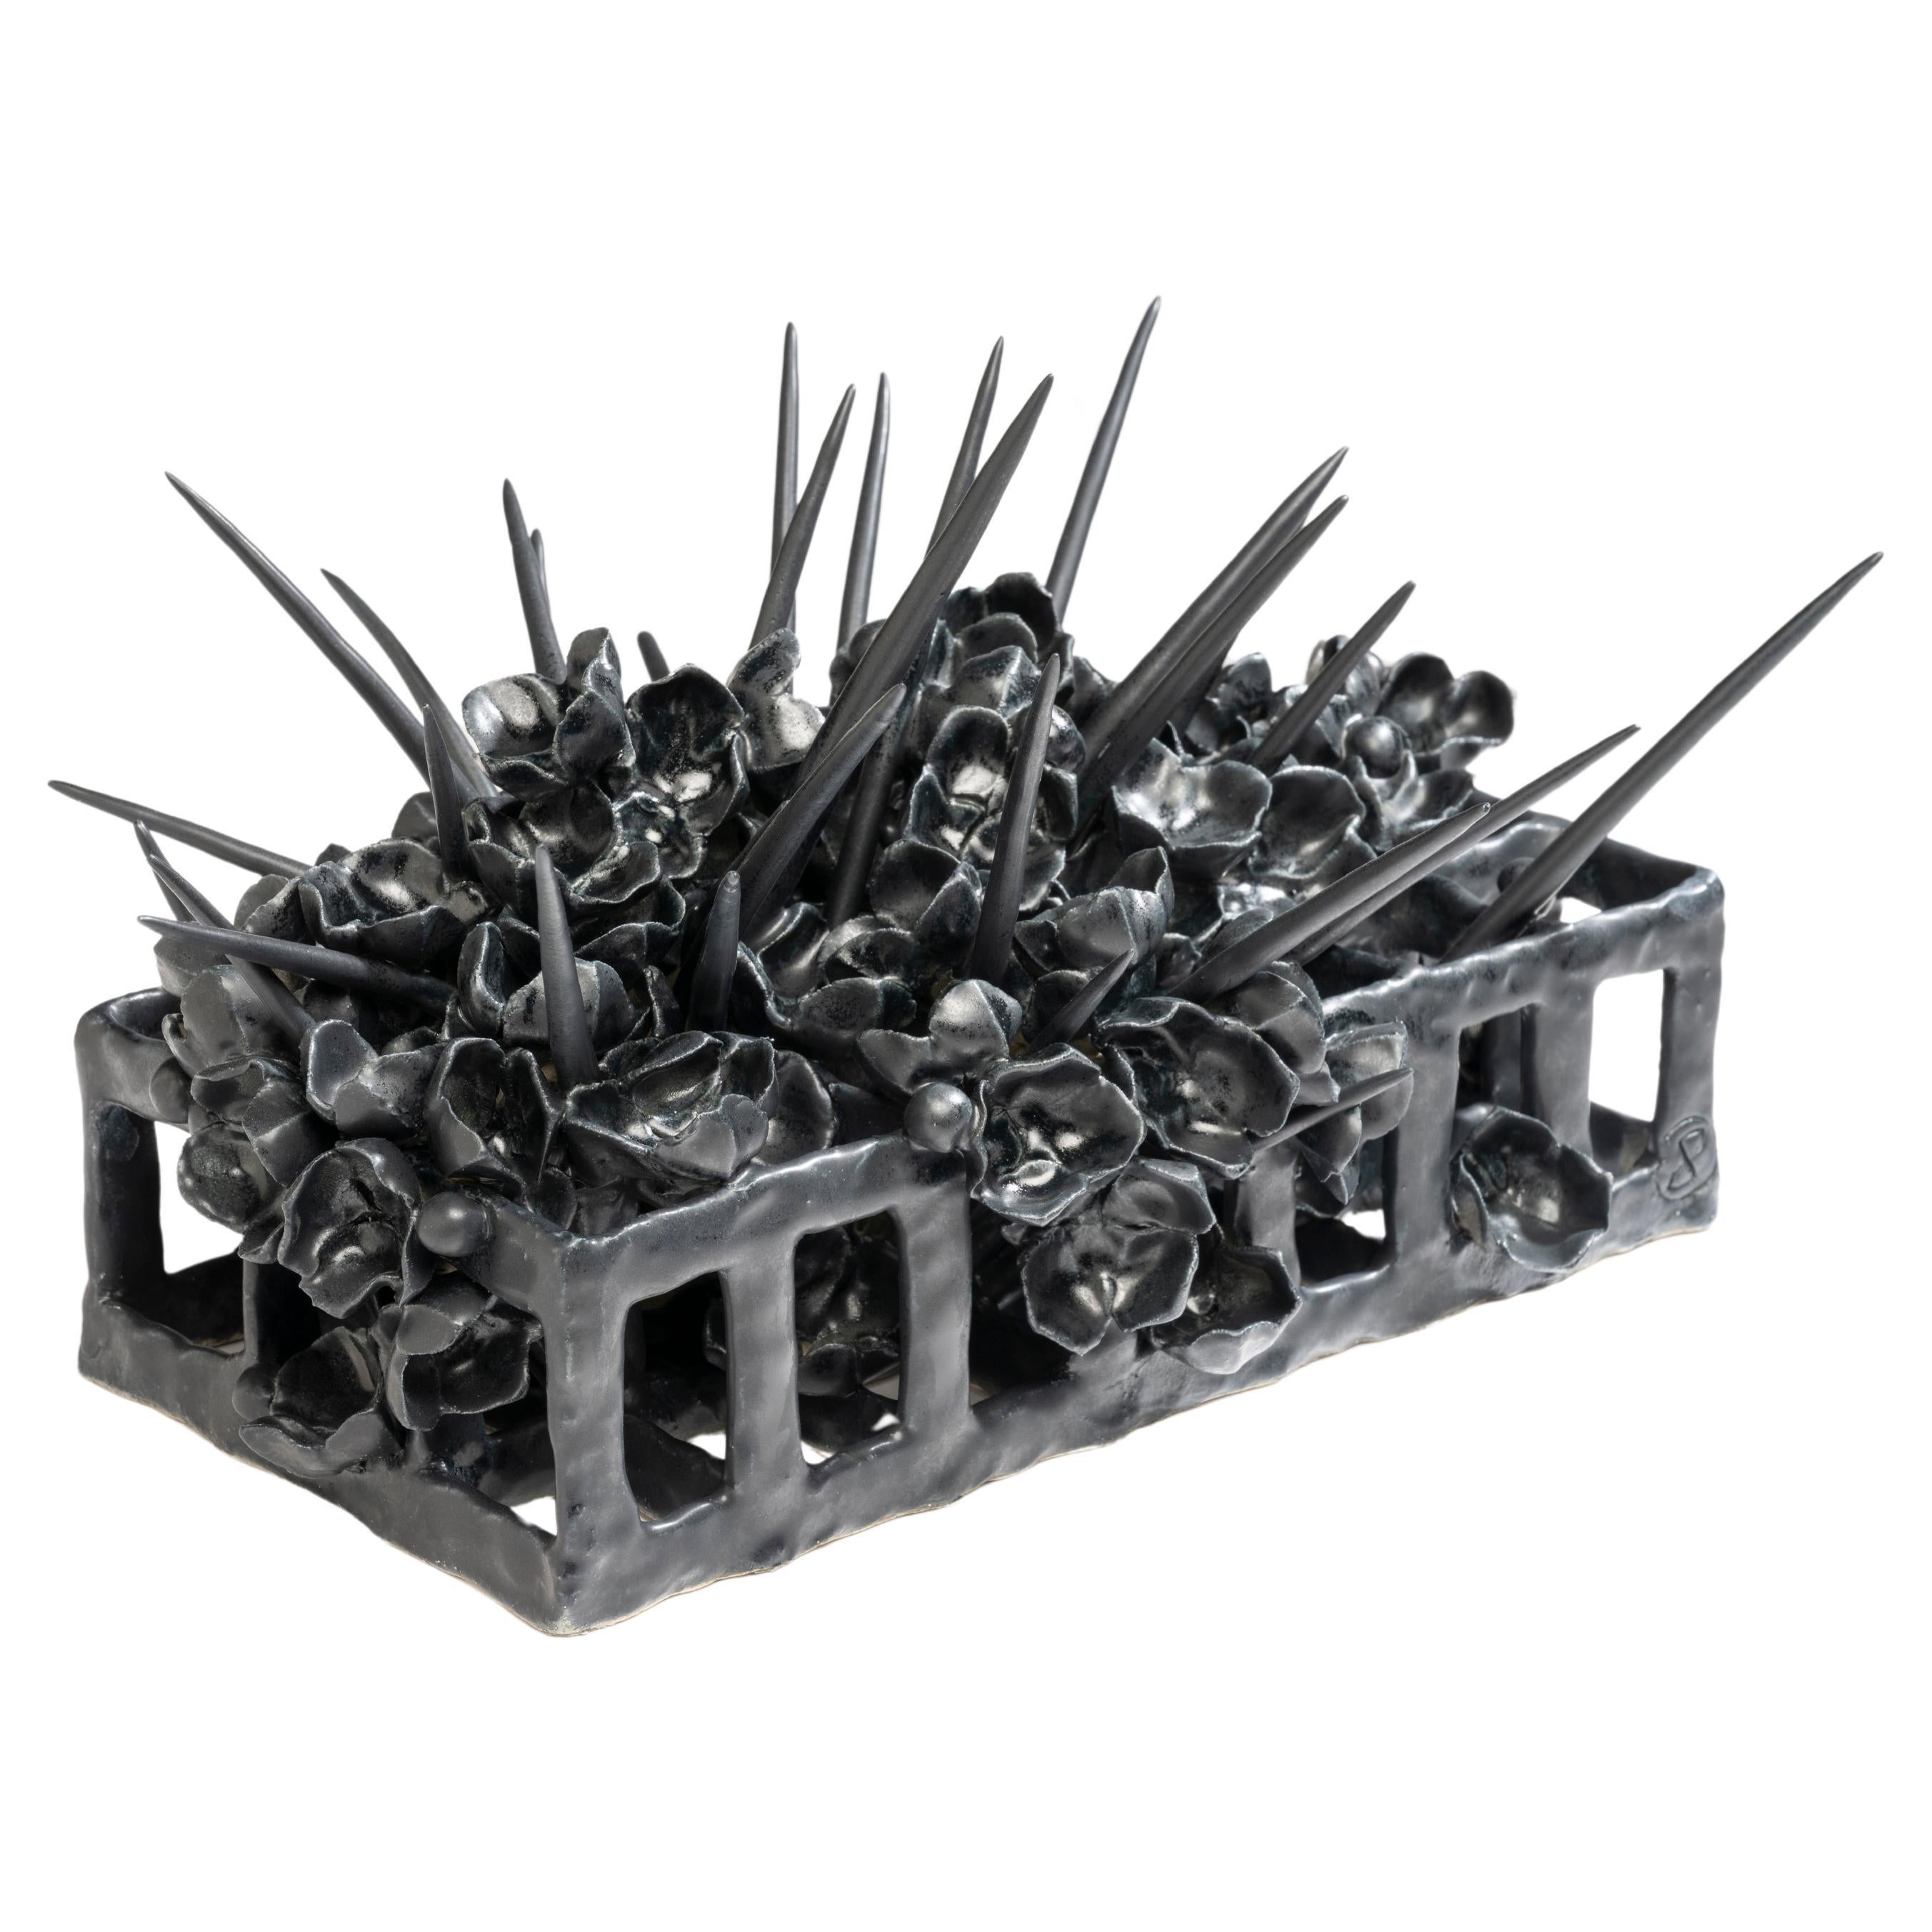 Joanna Poag Binding Time (Black Grid with Quills) Ceramic Sculpture, 2021 For Sale